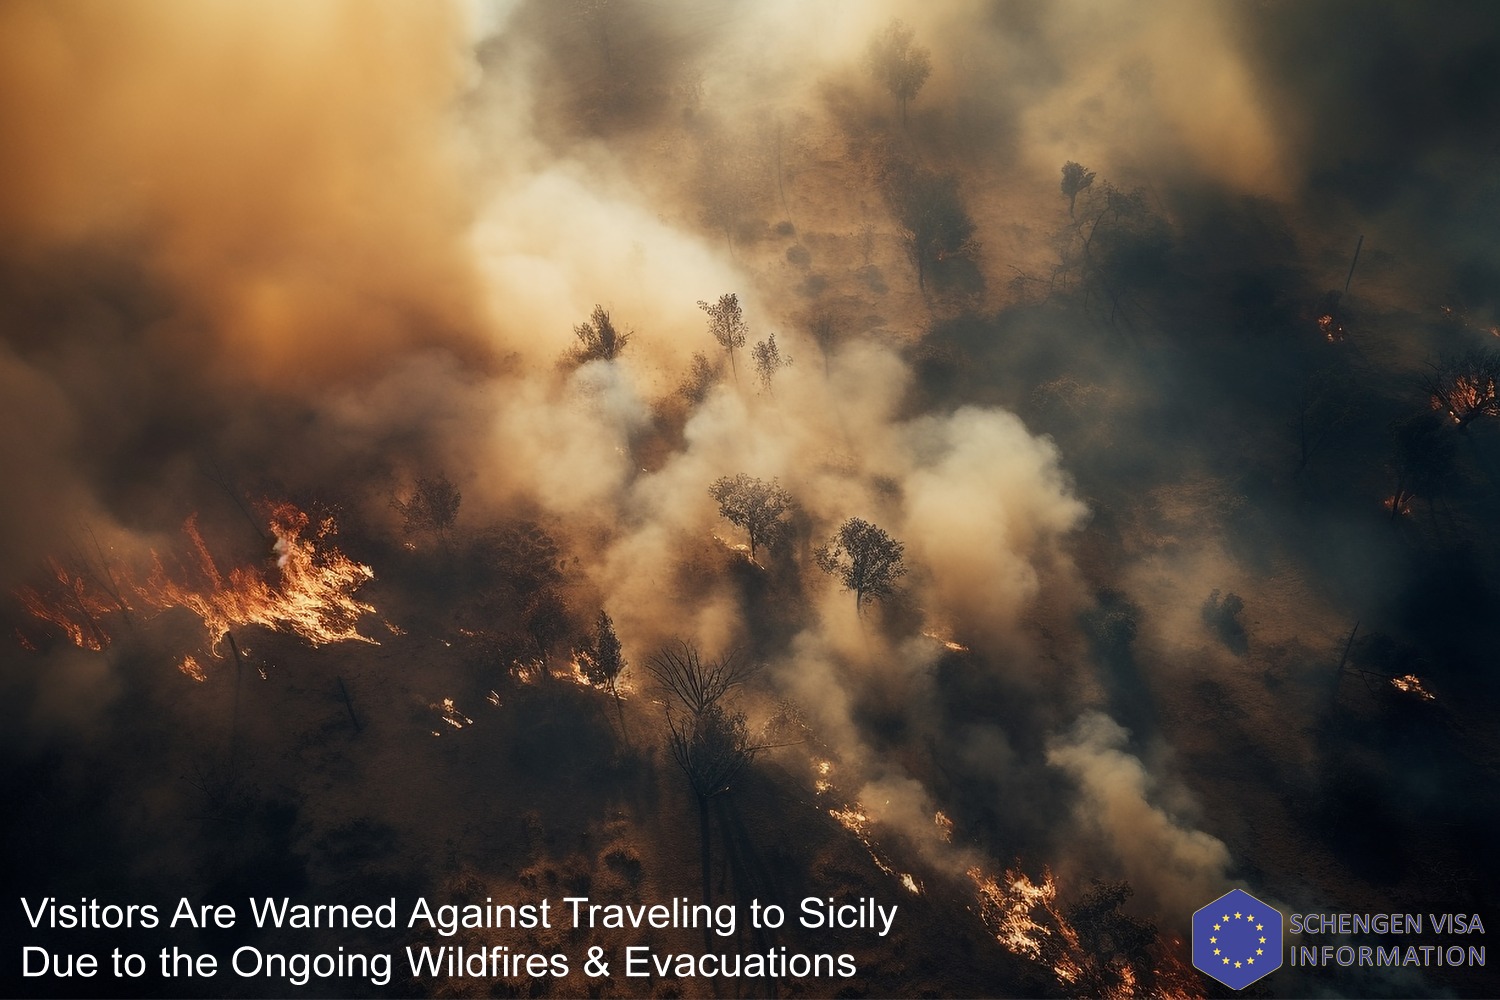 Visitors Are Warned Against Traveling to Sicily Due to the Ongoing Wildfires & Evacuations